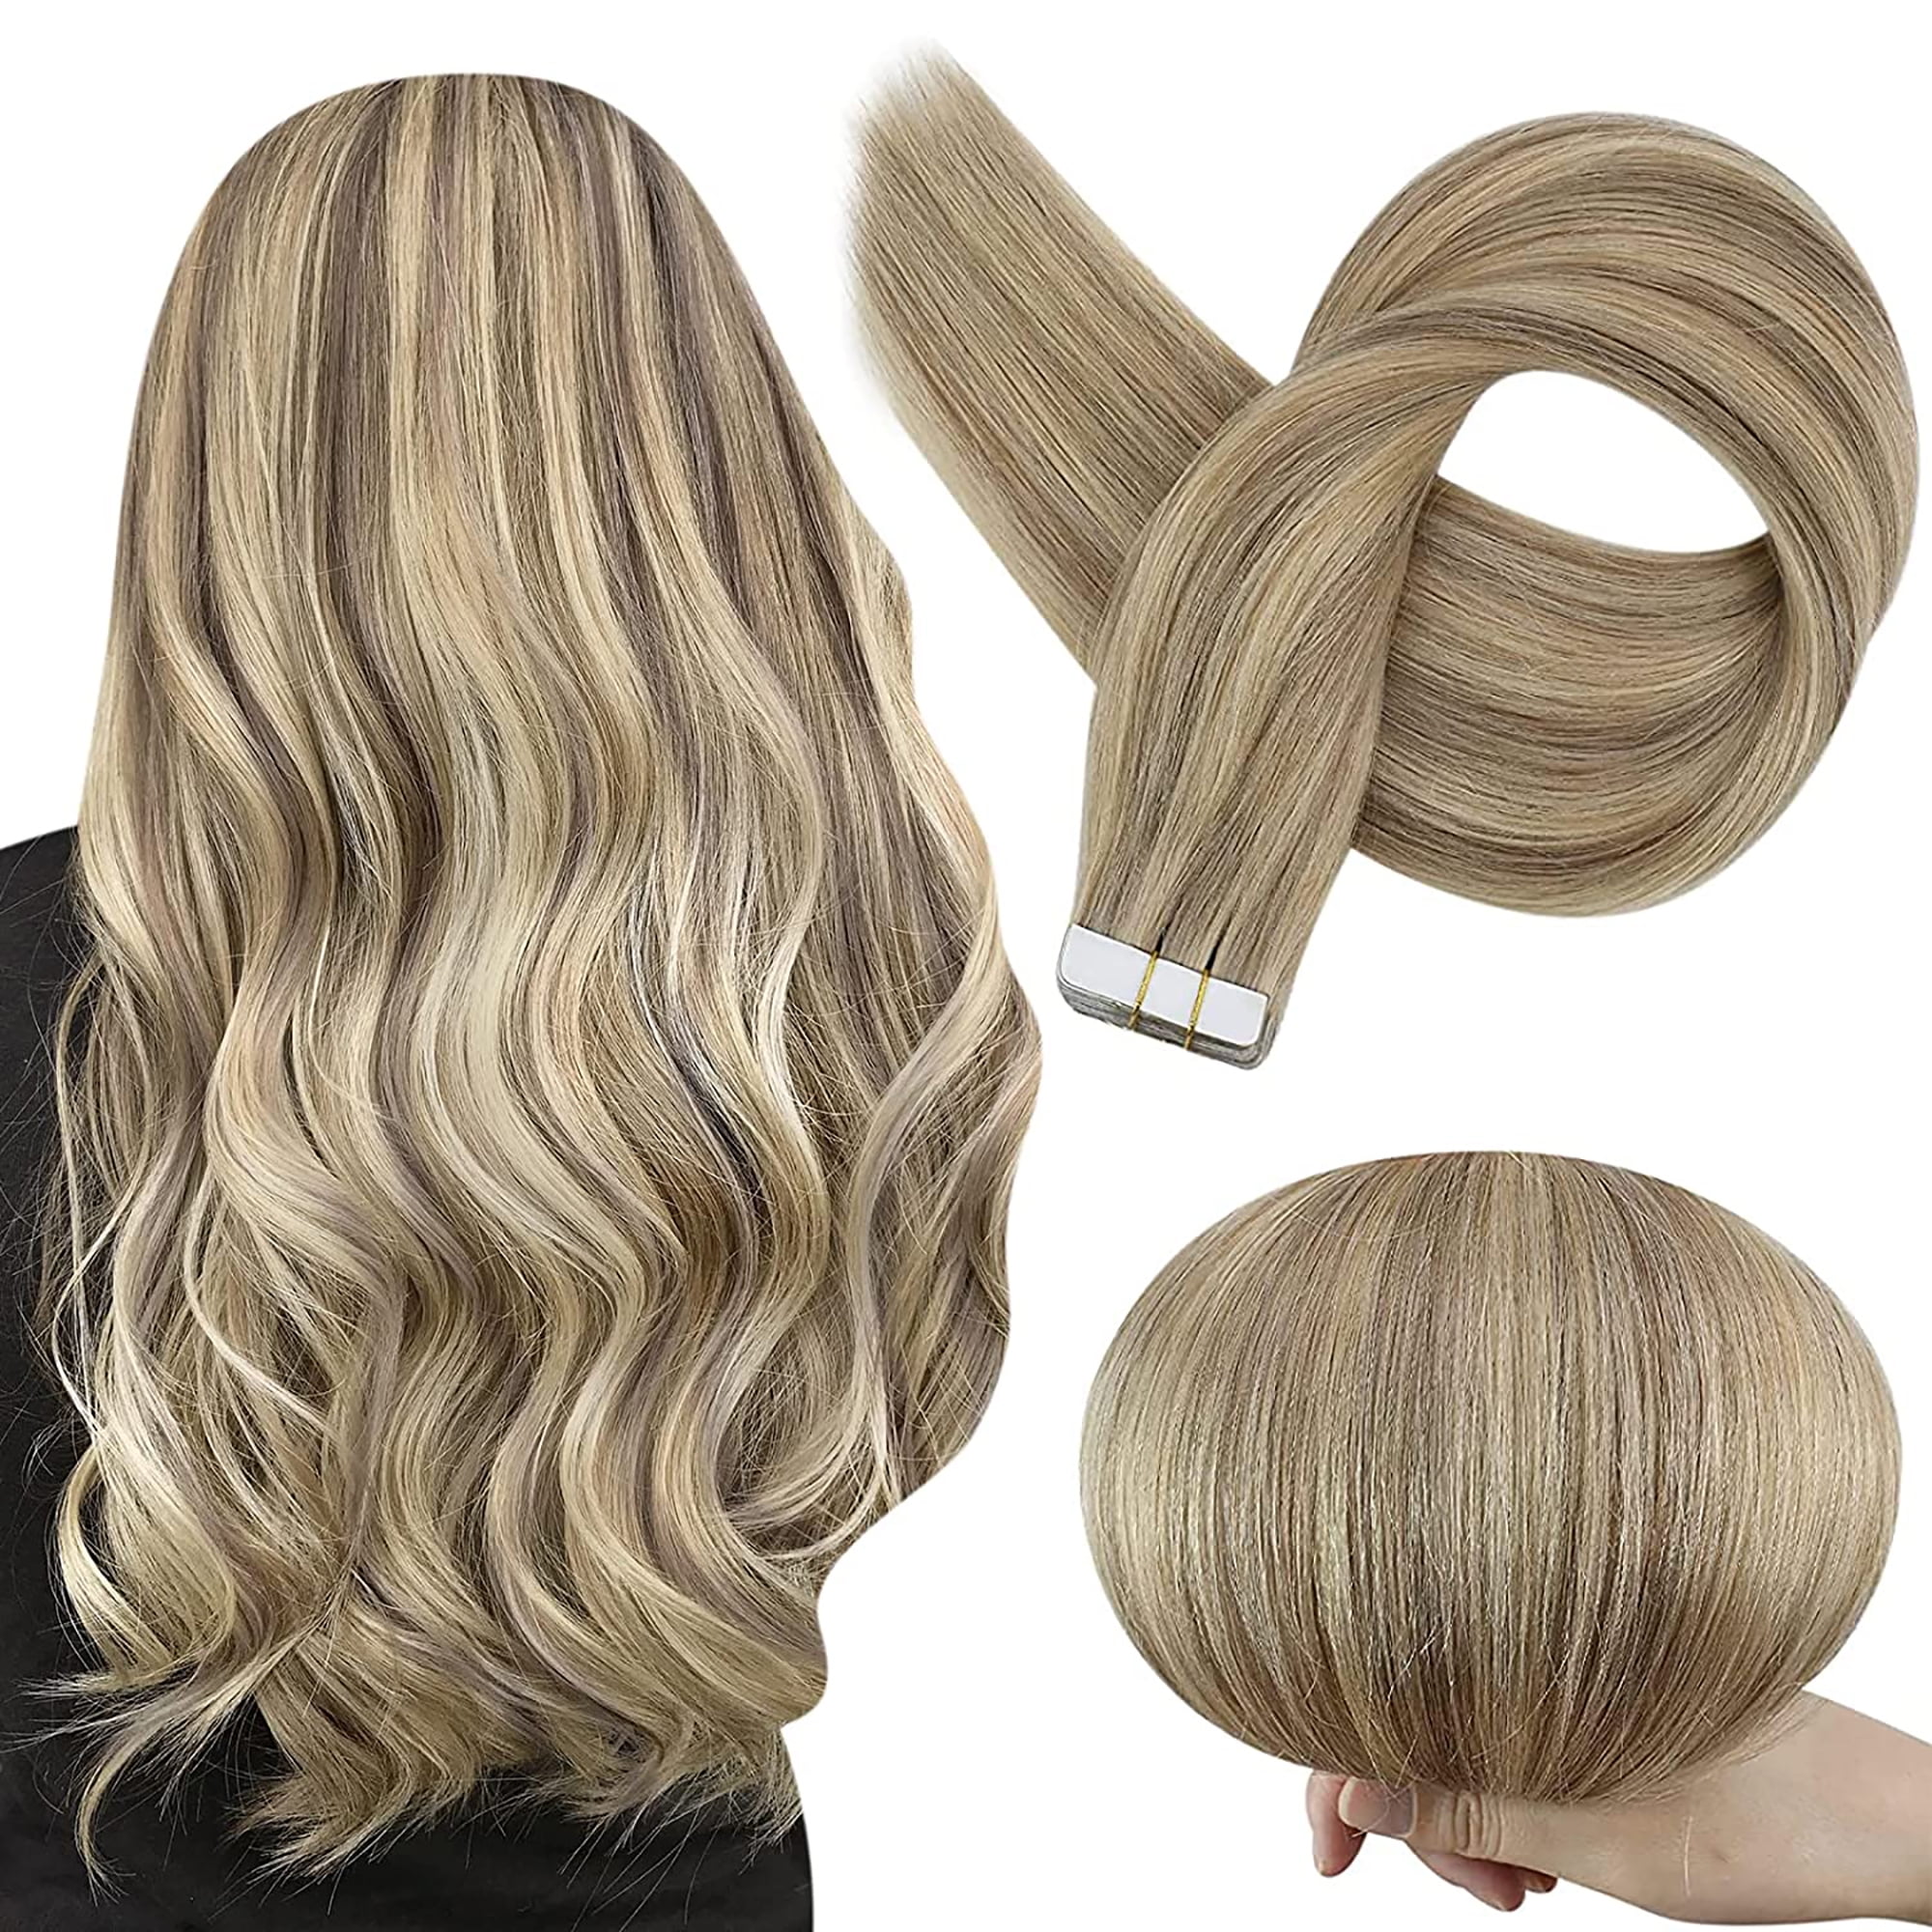 Full Shine Tape in Extensions Human Hair Extensions for Women Remy Real Hair  18 inch 20Pcs Blonde Highlighted Extensions 50g 